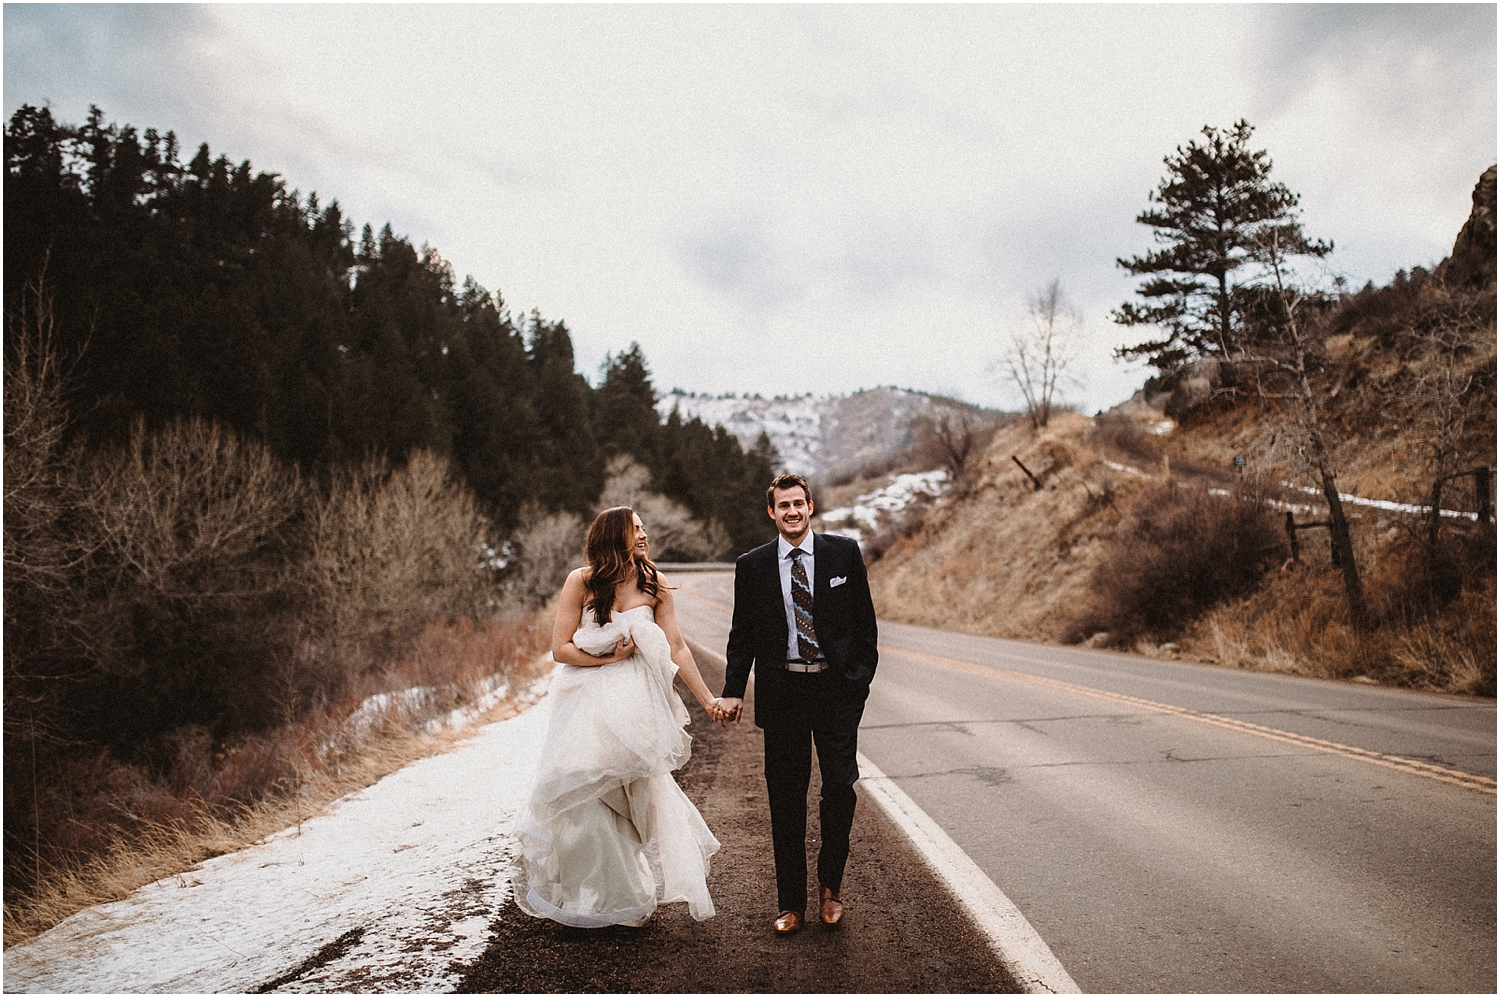 Lindy + Sterling Colorado Adventure, Anniversary Session